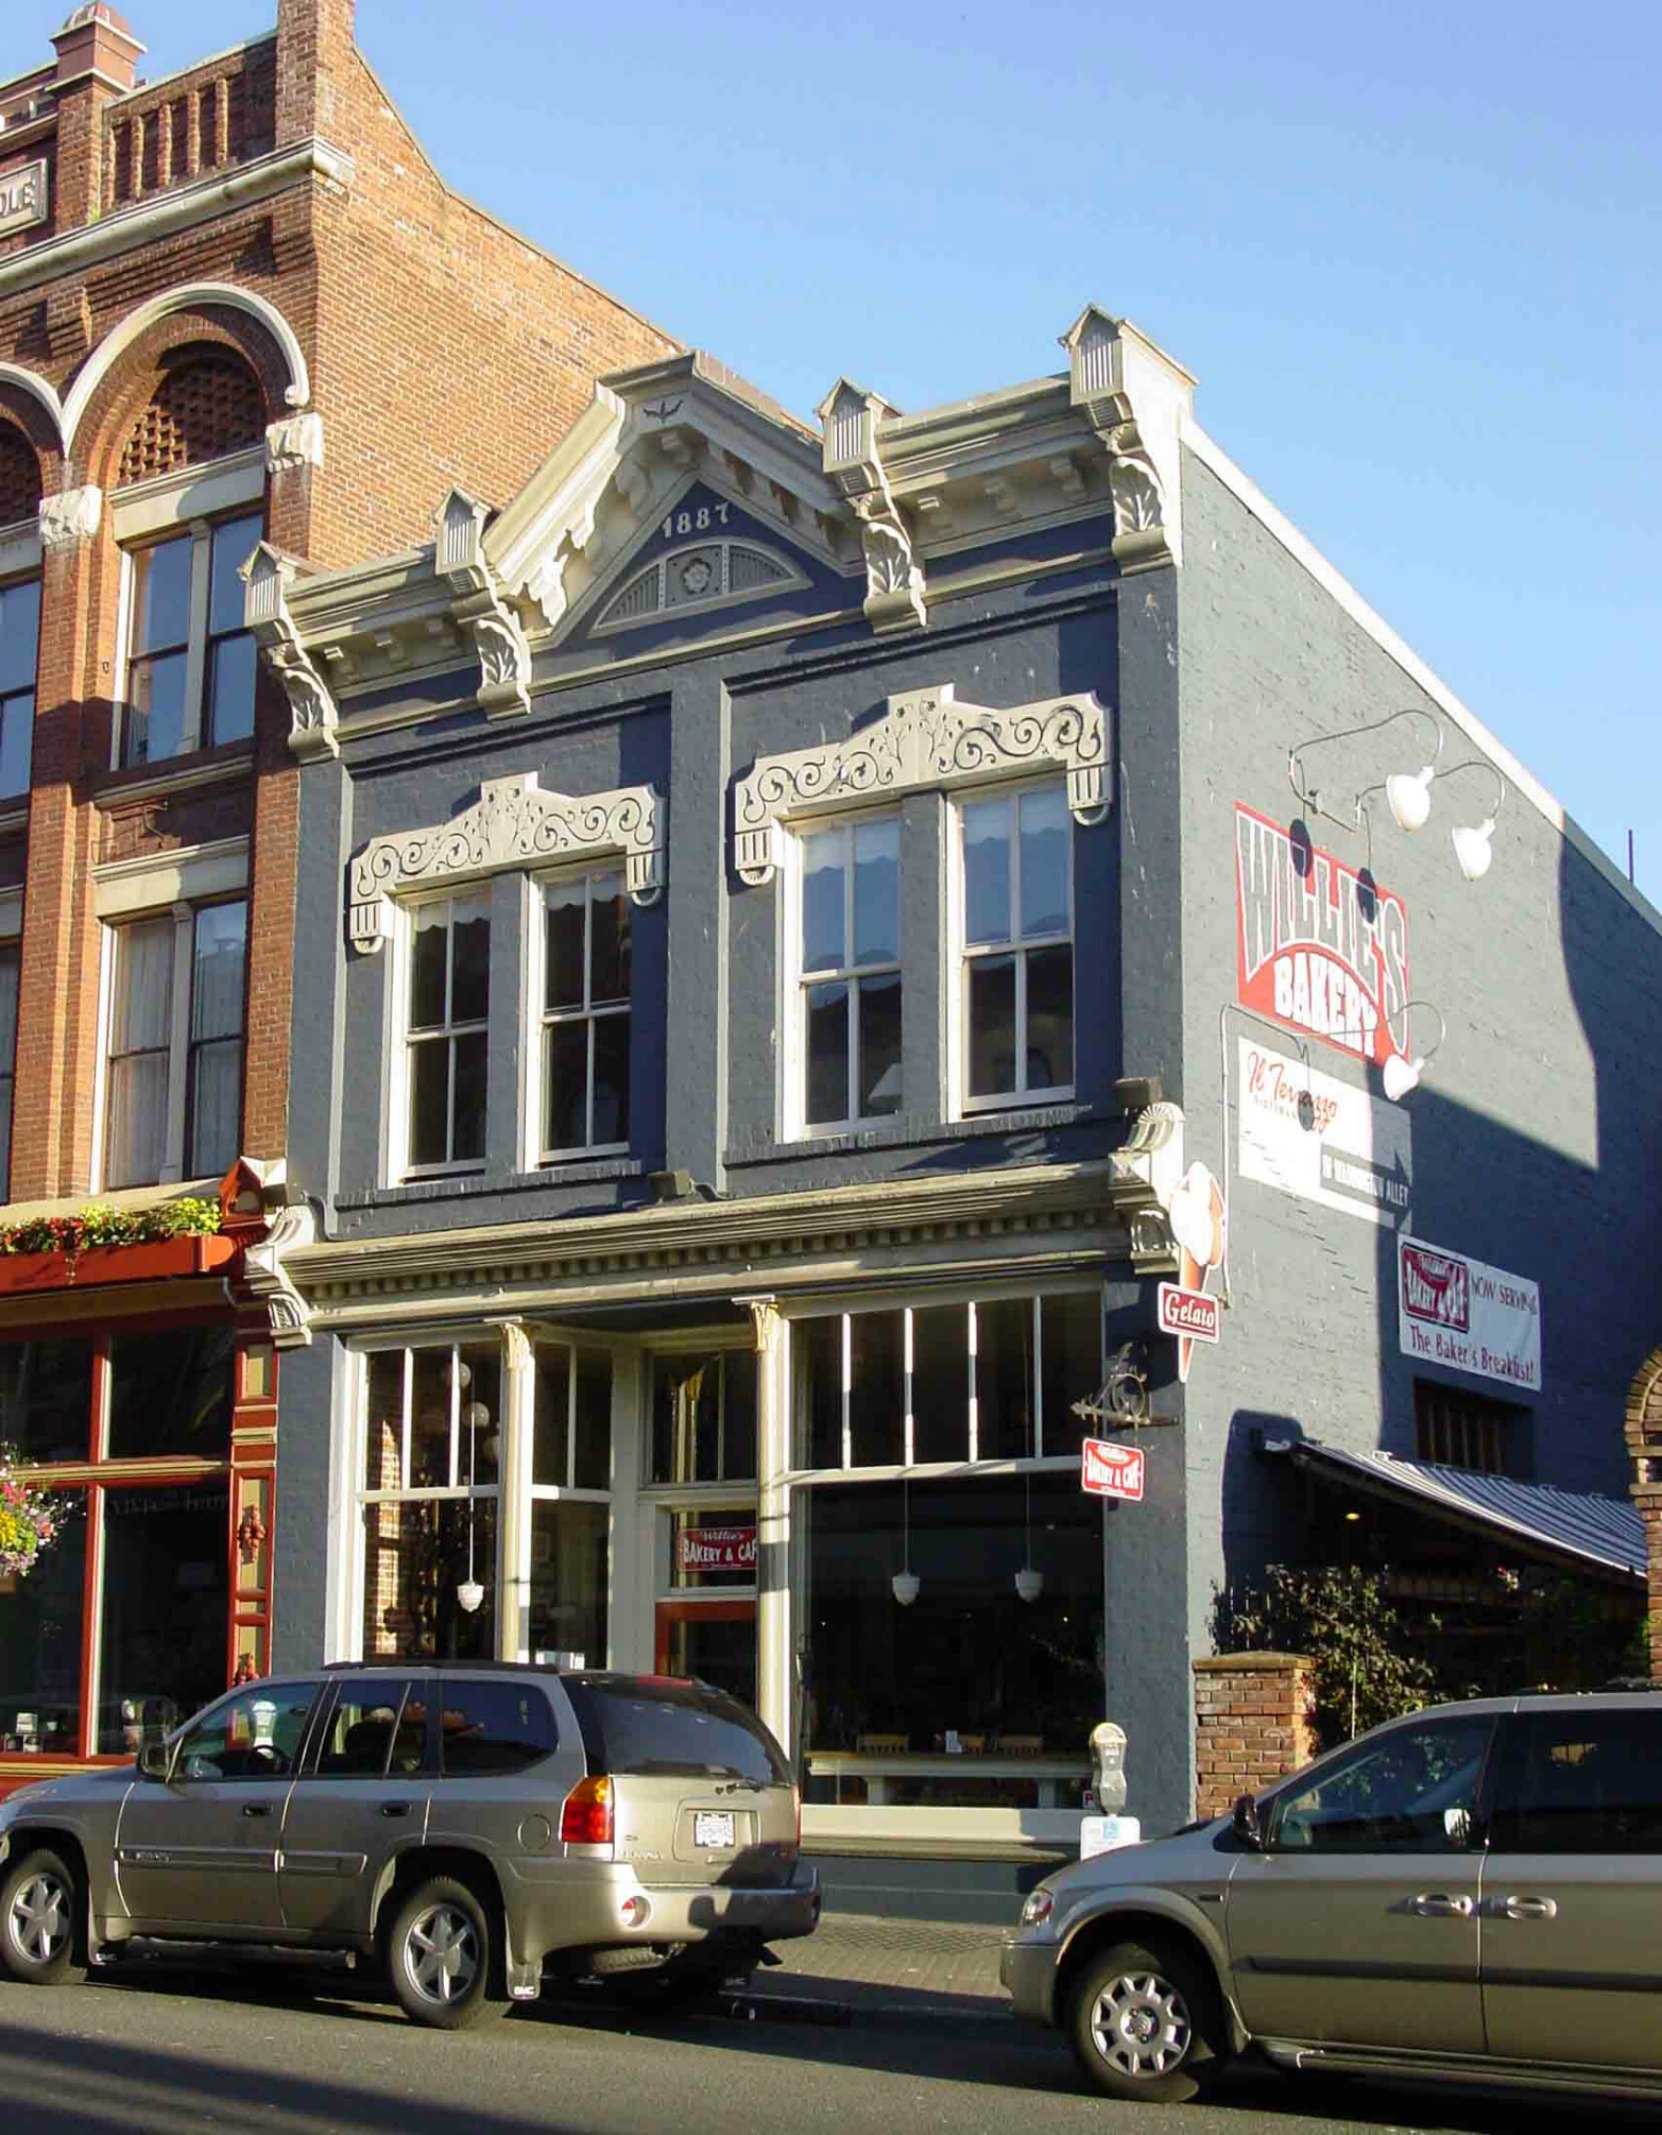 537 Johnson Street, Wille's Bakery, built in 1887 by architect Elmer H. Fisher for Louis Wille.